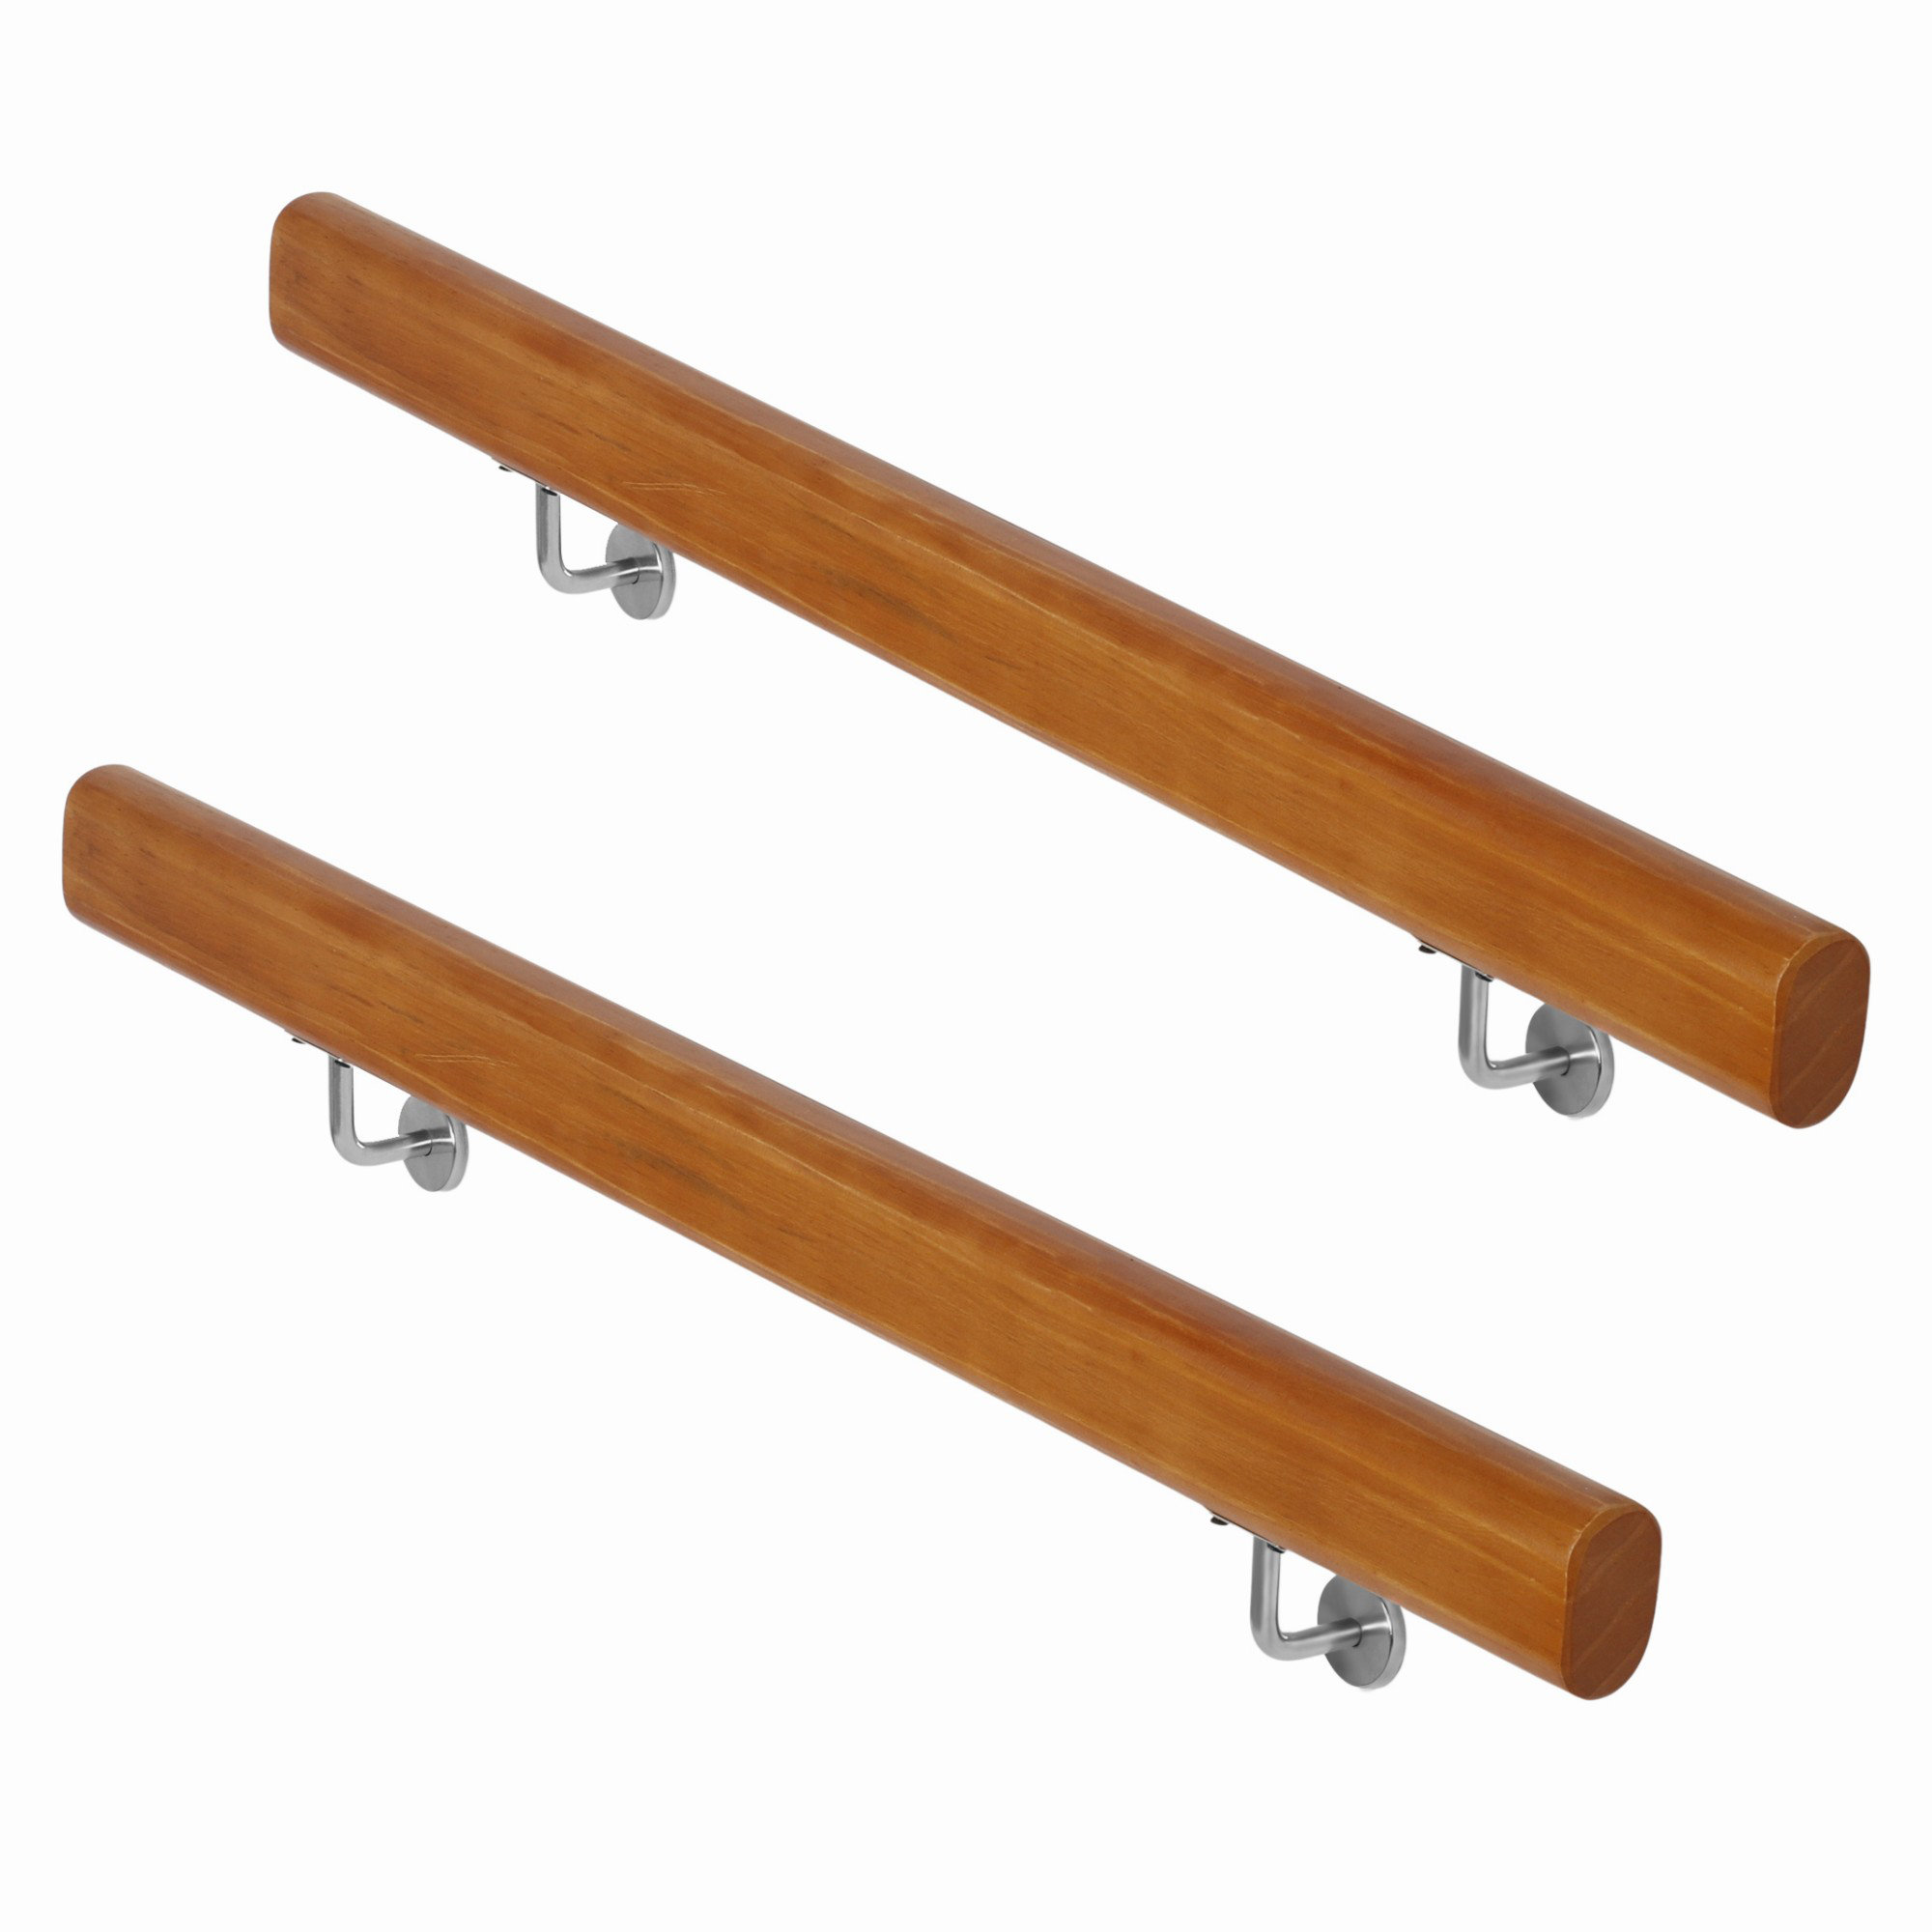 Tonchean Wood Handrails for Indoor Stairs, Safety Non-Slip Stair